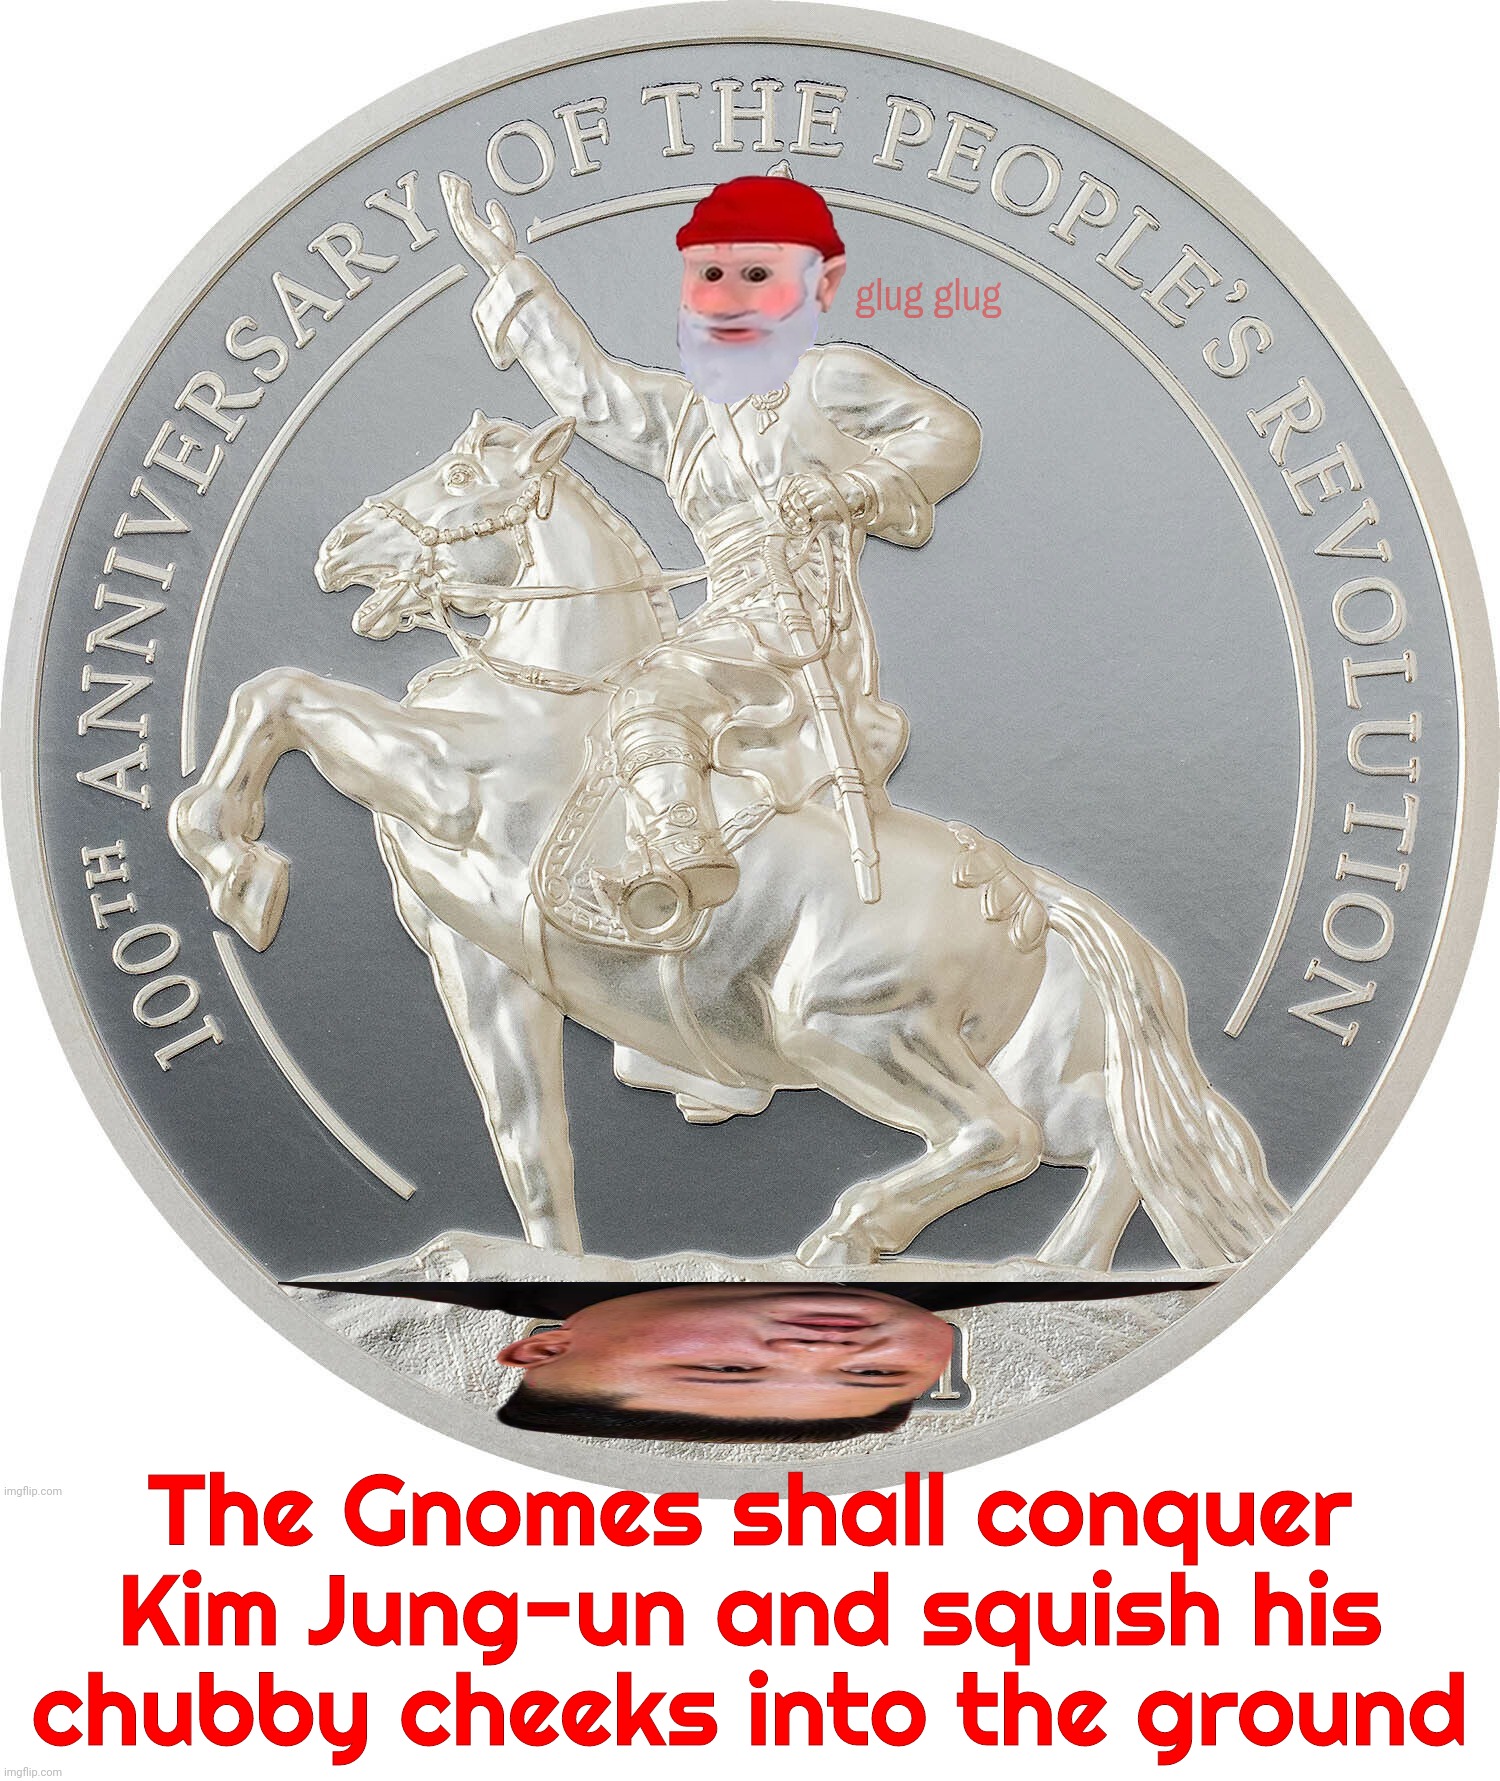 Say goodbye to you chubby cheeks, you overgrown manbaby | glug glug The Gnomes shall conquer Kim Jung-un and squish his chubby cheeks into the ground | image tagged in blank white template,mongolia 2021 people's revolution coin,gnome,not that mongolians are gnomes,kim jong un,horse | made w/ Imgflip meme maker